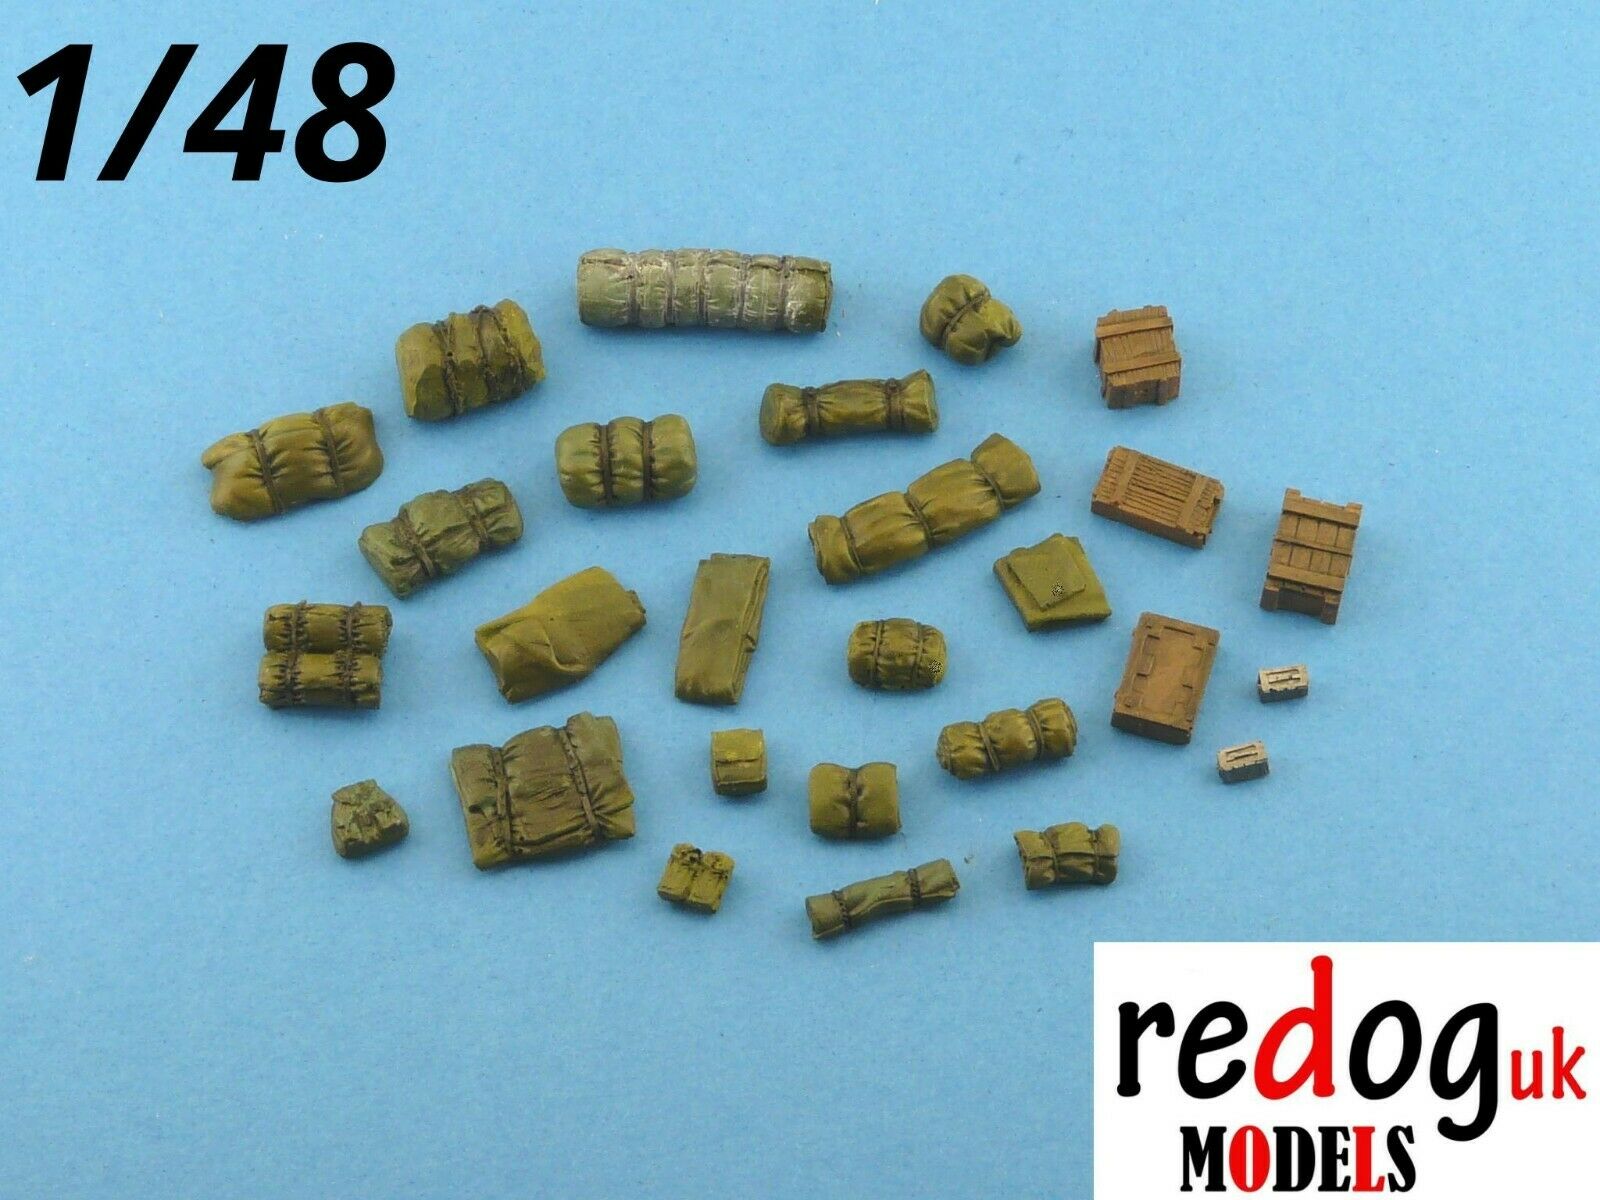 1/48  Military Scale Modelling Resin Stowage Kit Diorama Accessories Kit 1 - redoguk